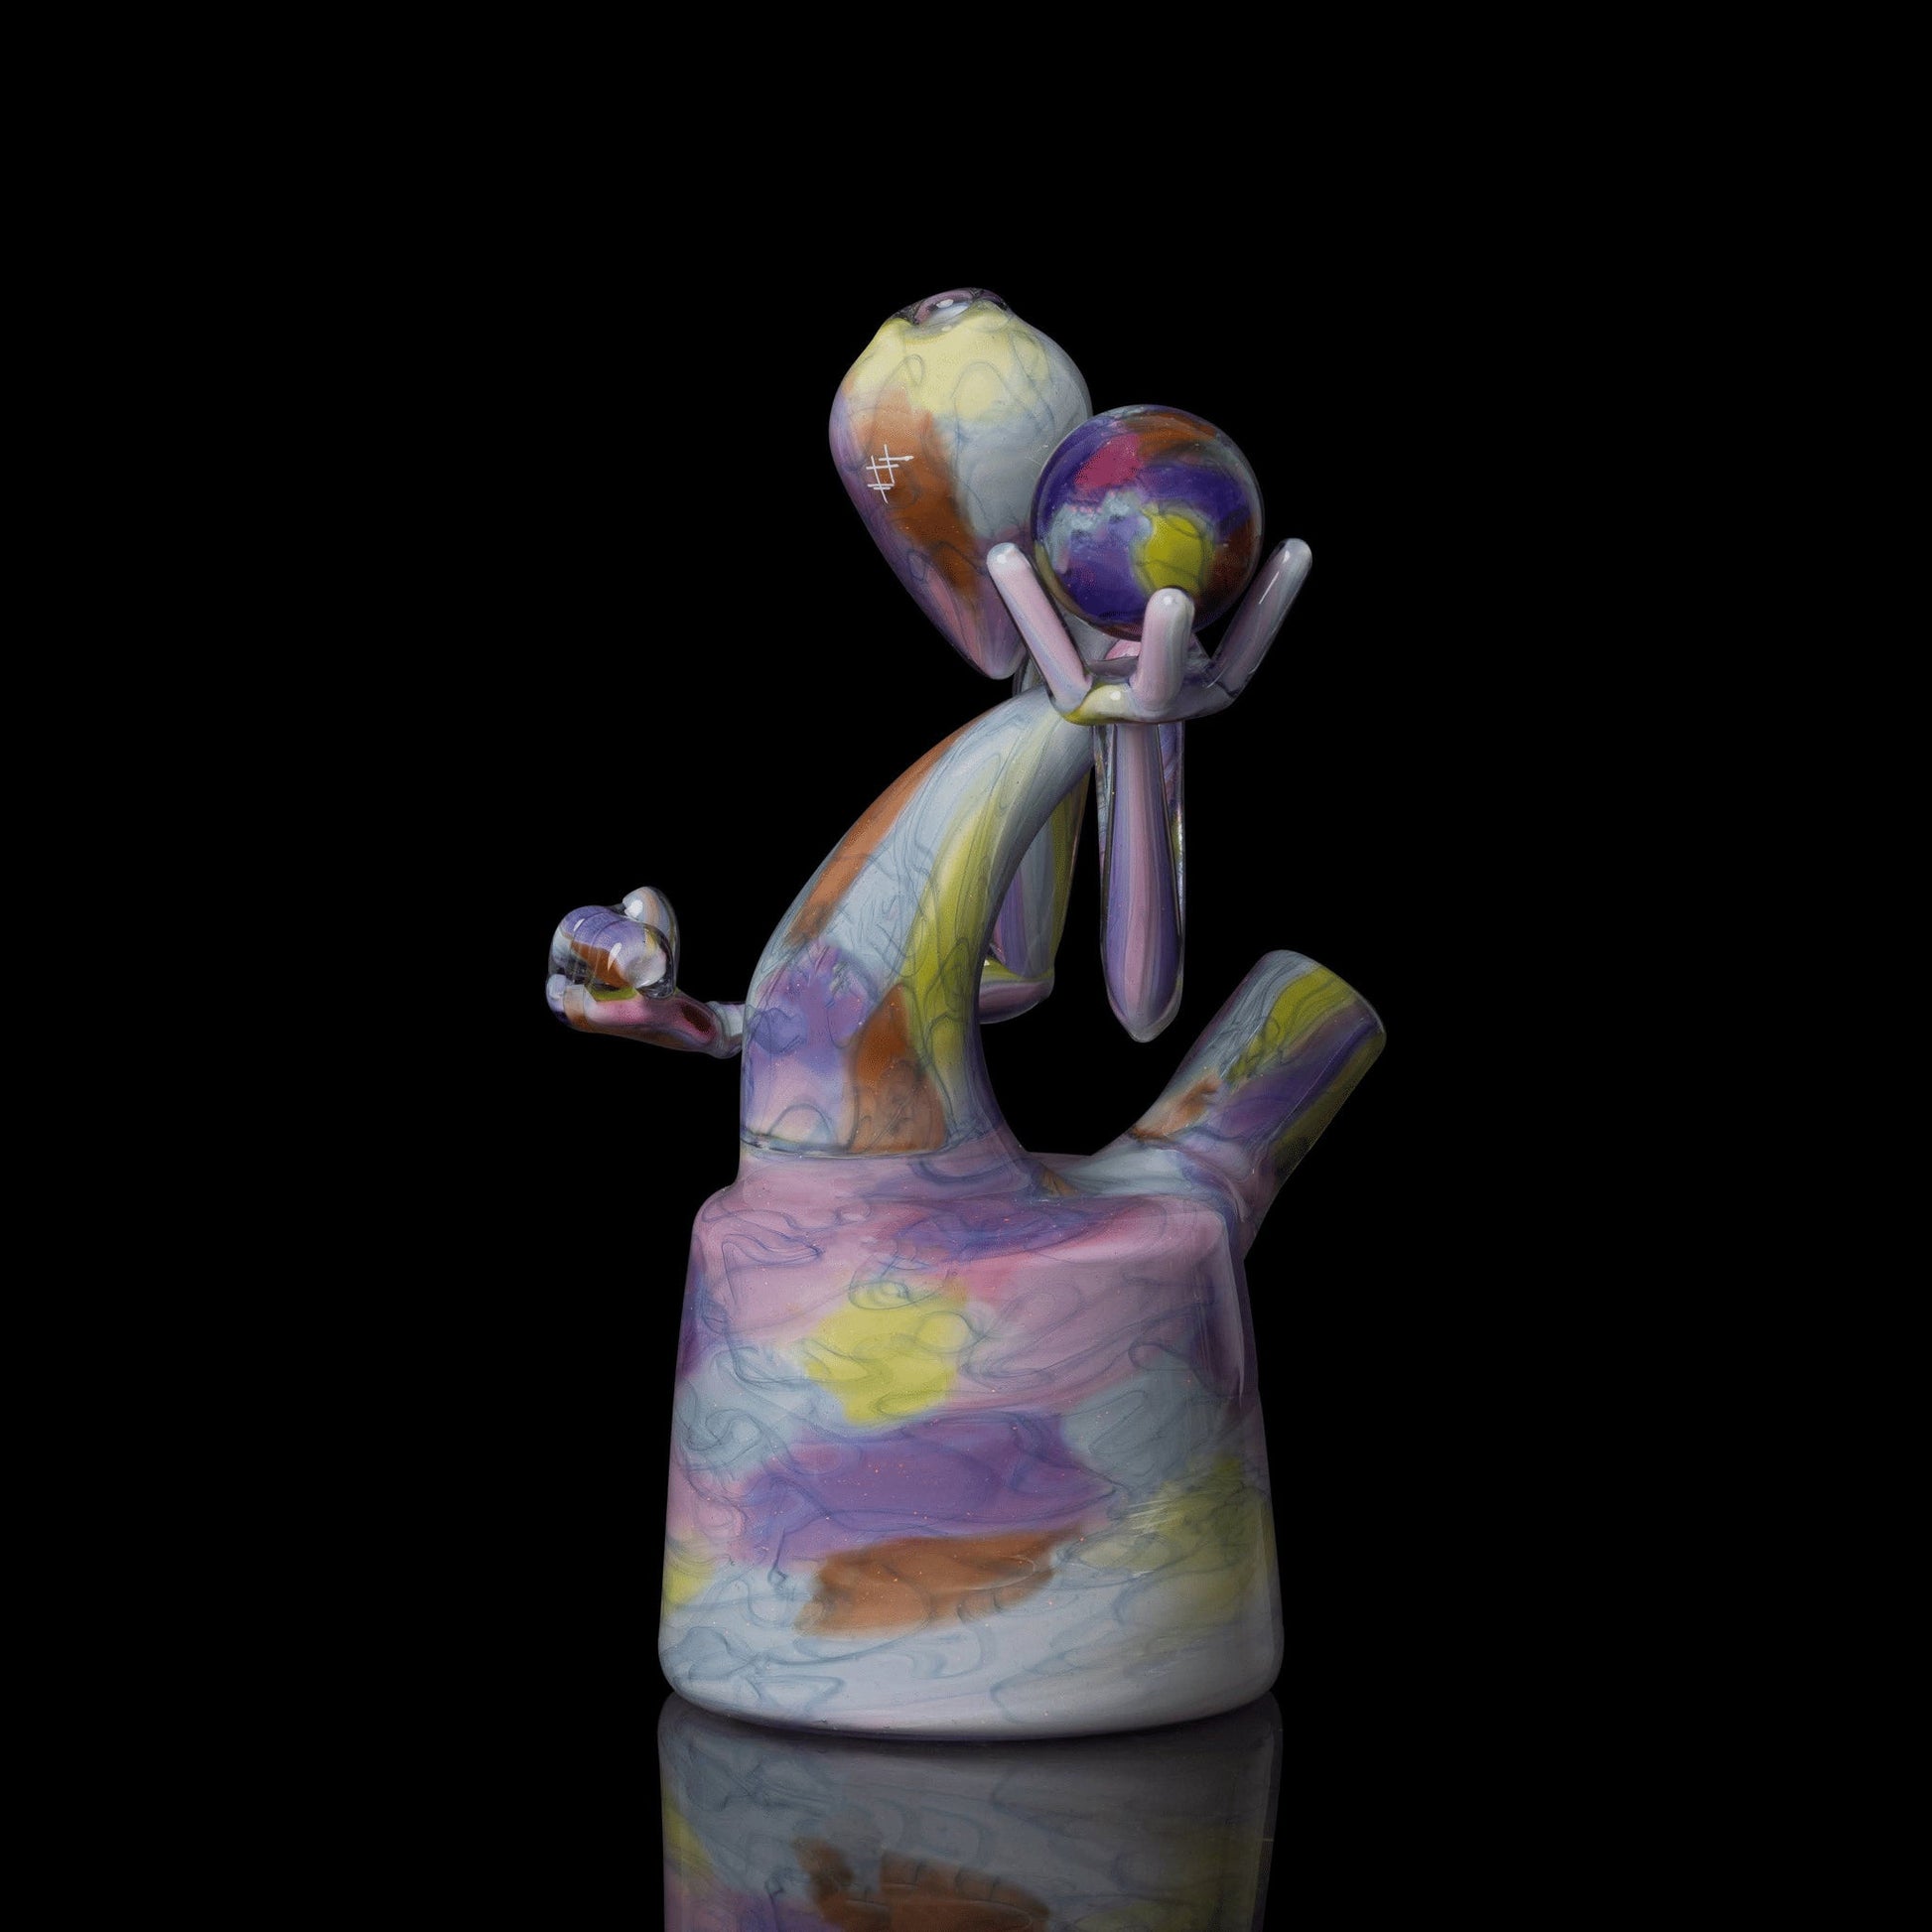 heady art piece - Collab Marble Collector by Yunk Glass x Scomo Moanet (Scribble Season 2022)